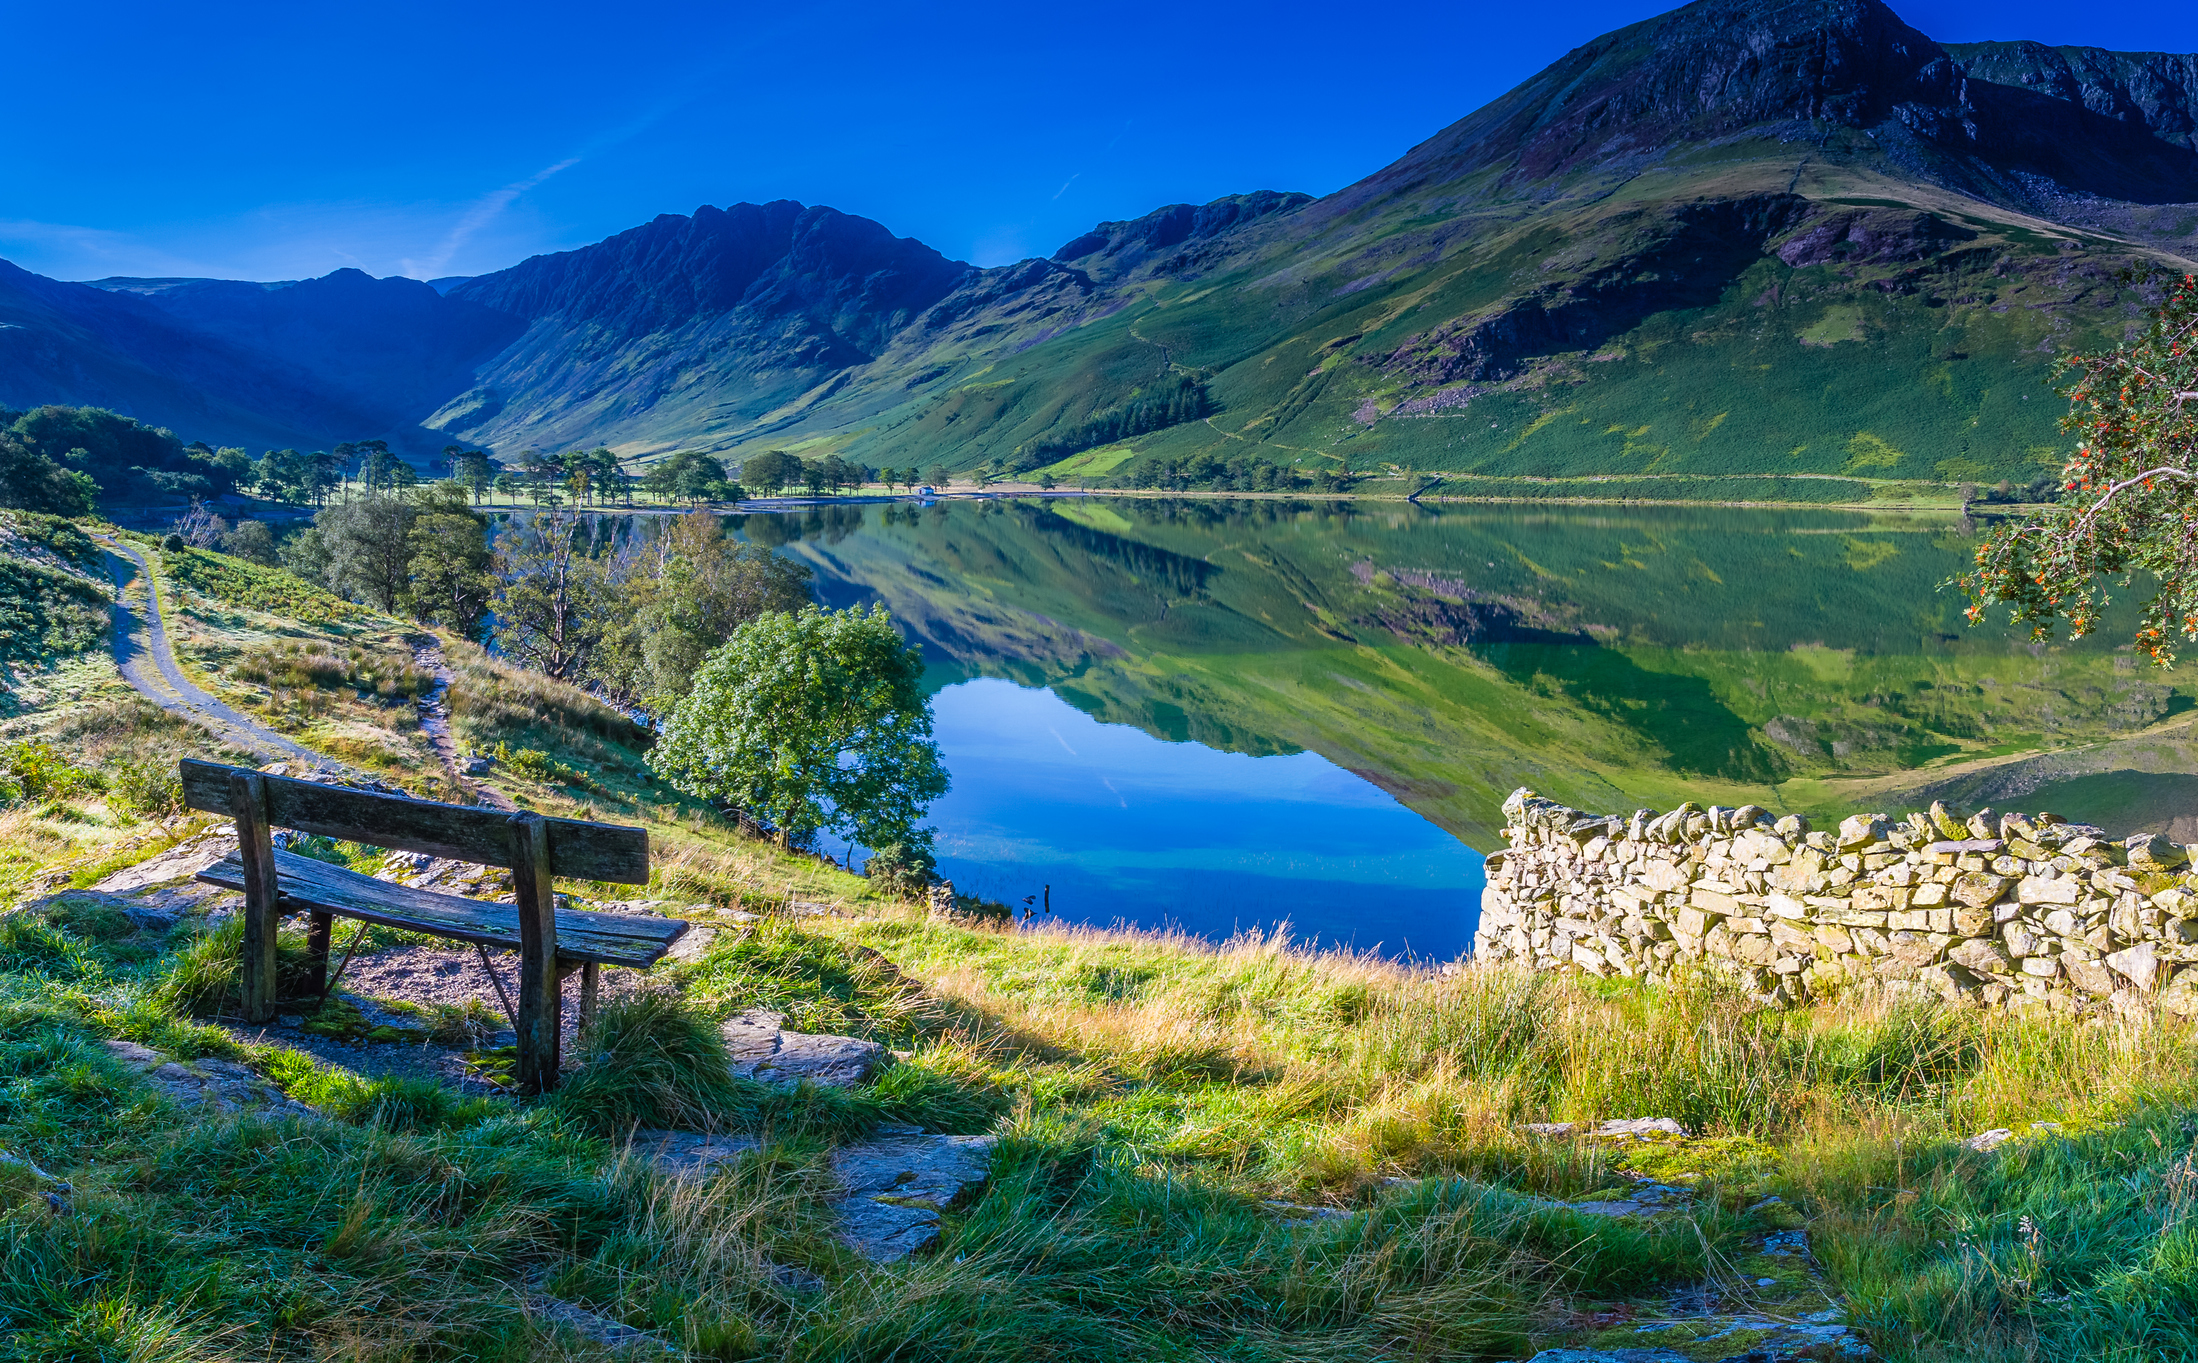 The Lake District: A five star holiday for four legged friends The